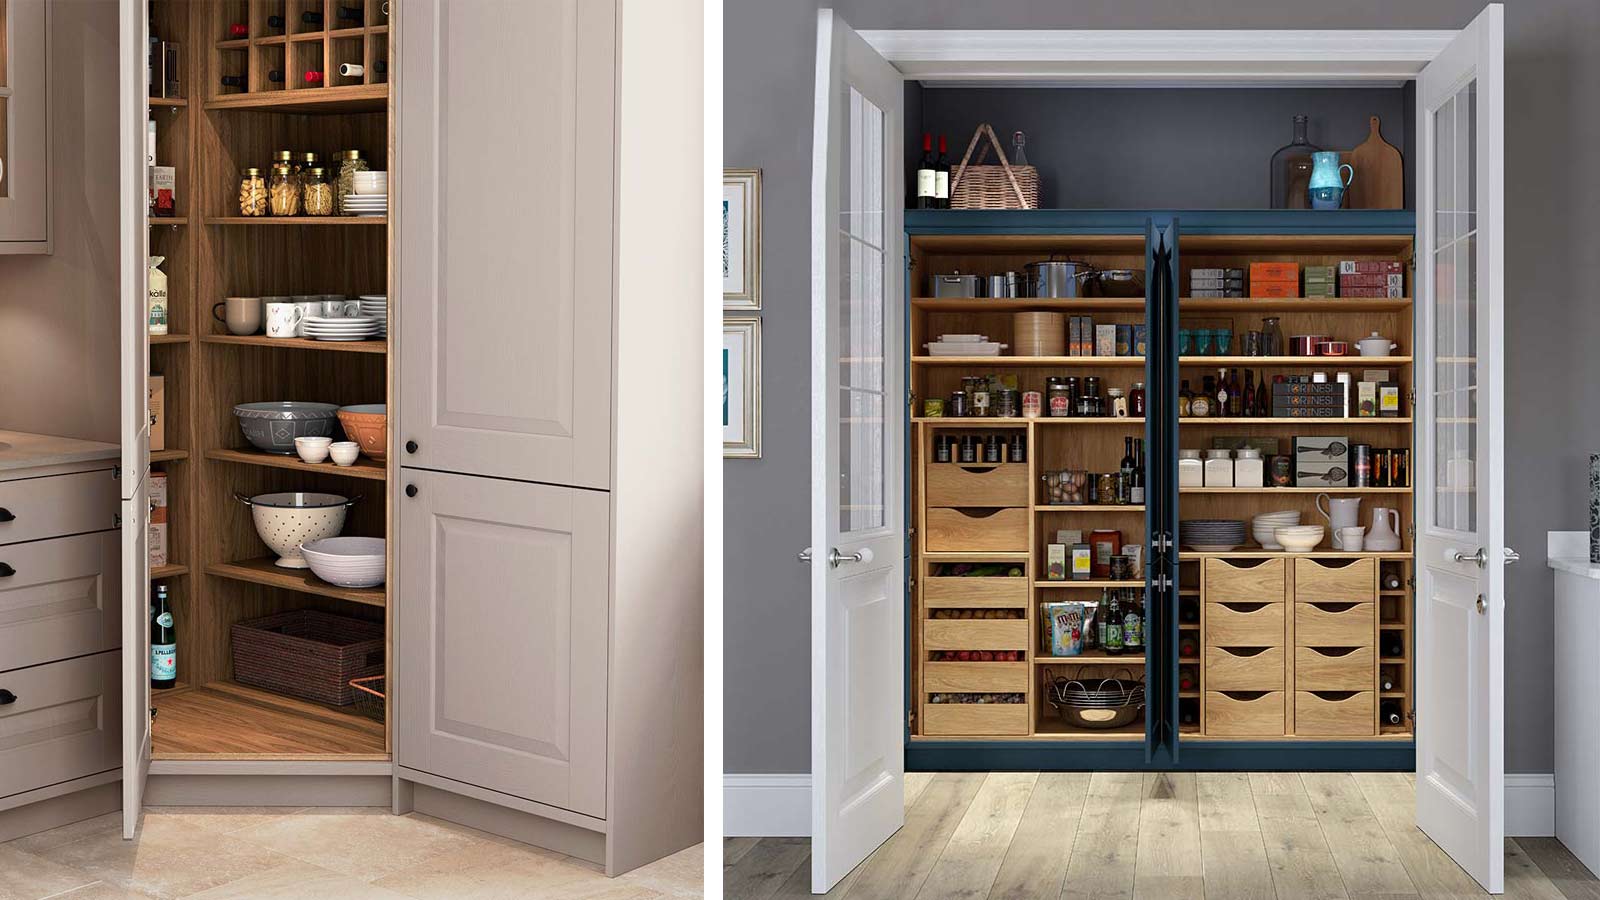 Two walk-in kitchen pantry options with corner shelves and pantry baskets